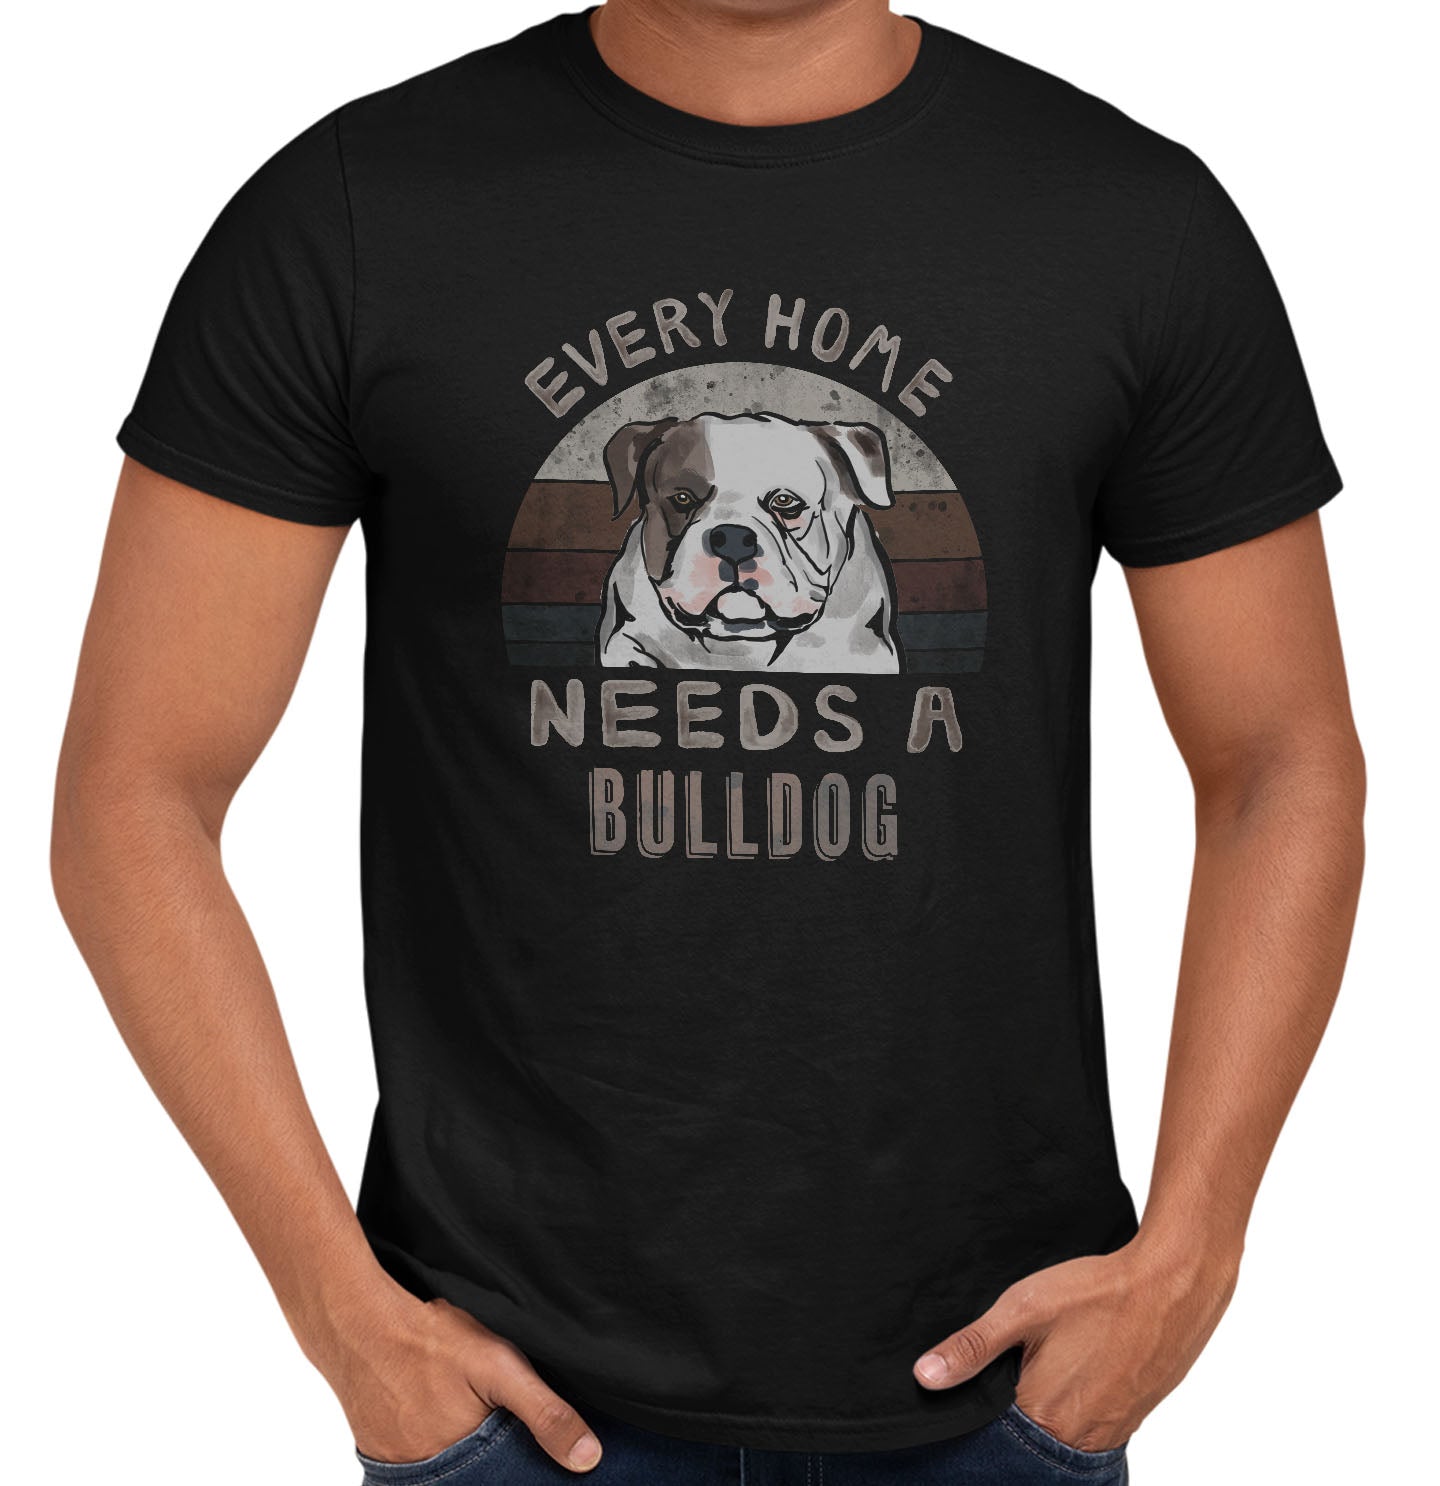 Every Home Needs a American Bulldog - Adult Unisex T-Shirt